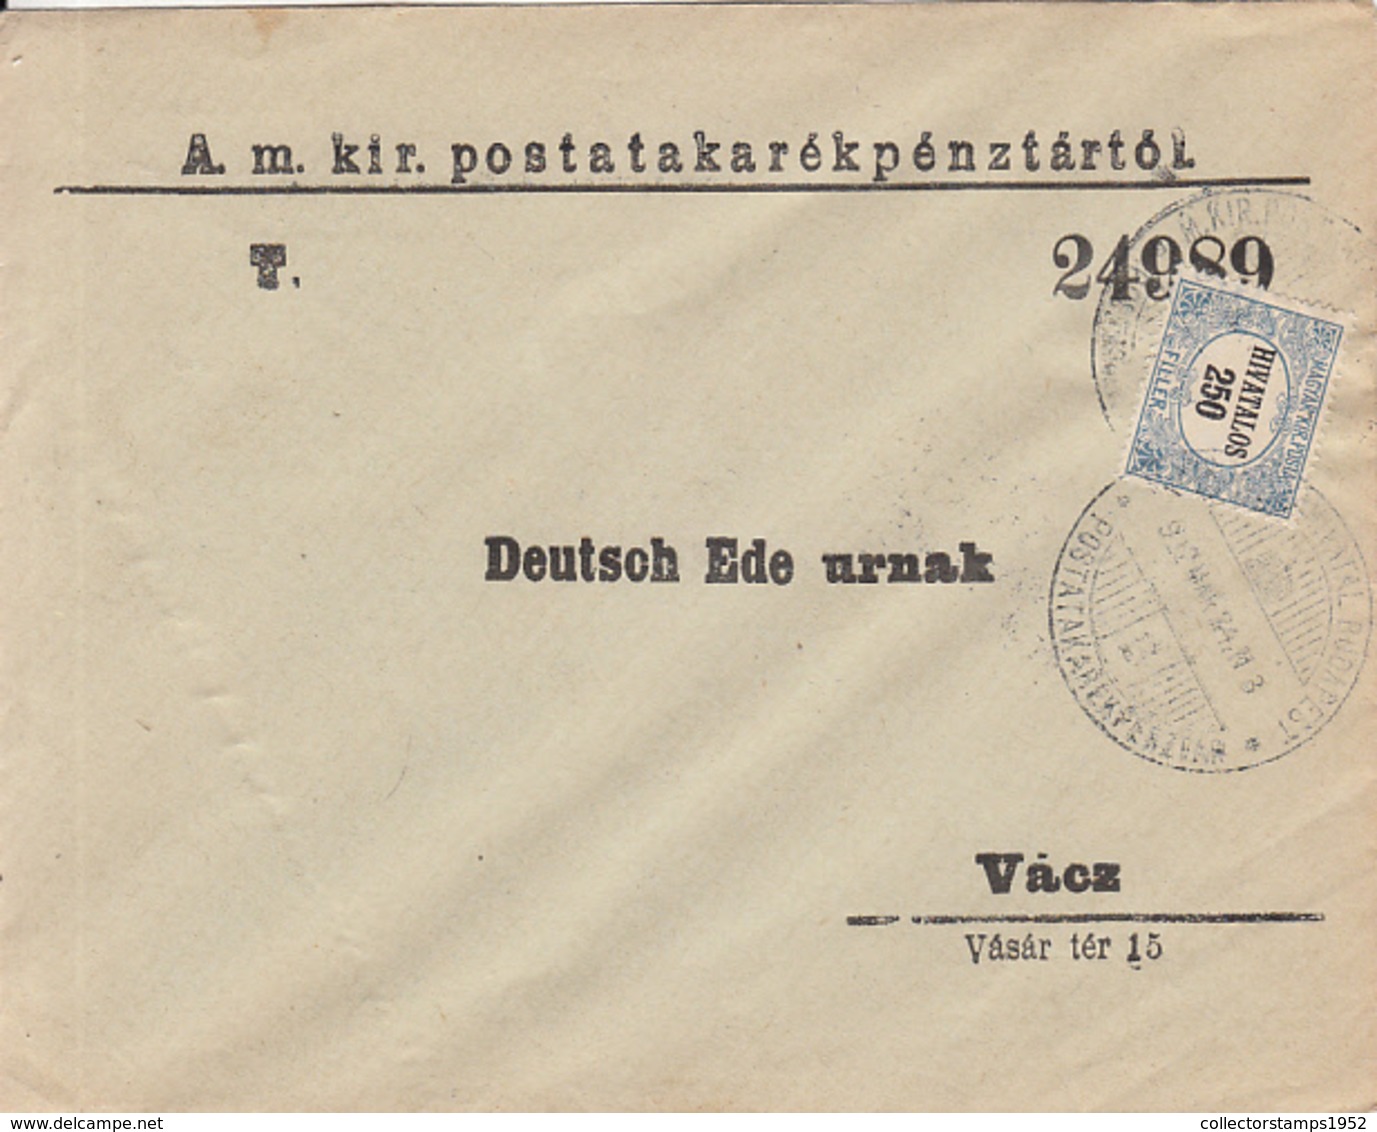 7345FM- 250 FILLER OFFICIAL STAMP ON POST SAVINGS BANK HEADER COVER, 1922, HUNGARY - Officials